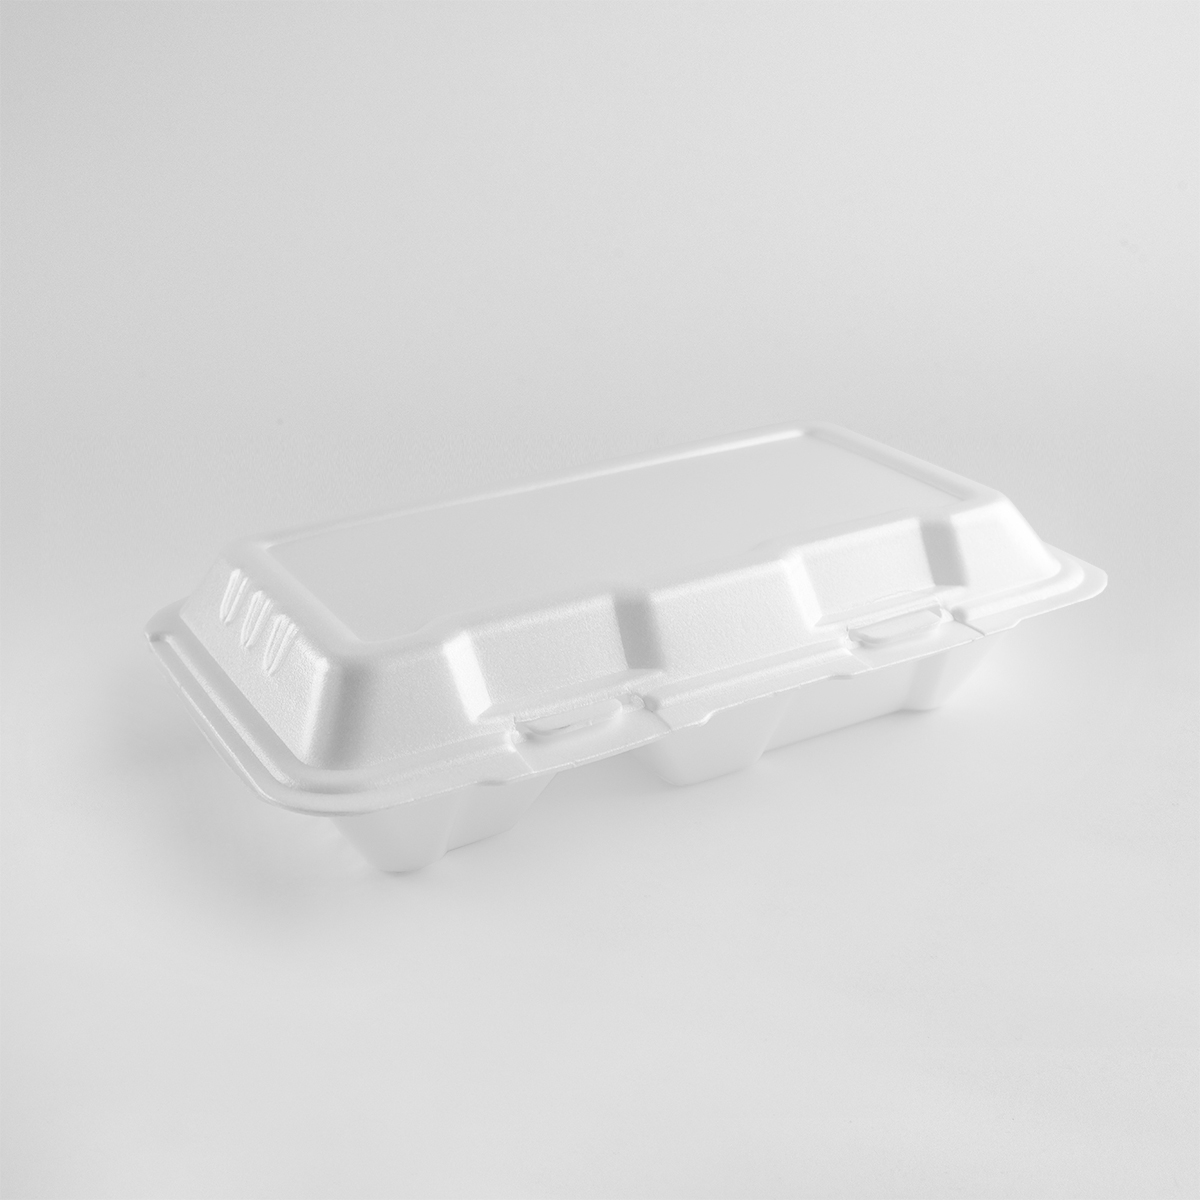 Lunch box (2 places) (200 pieces)